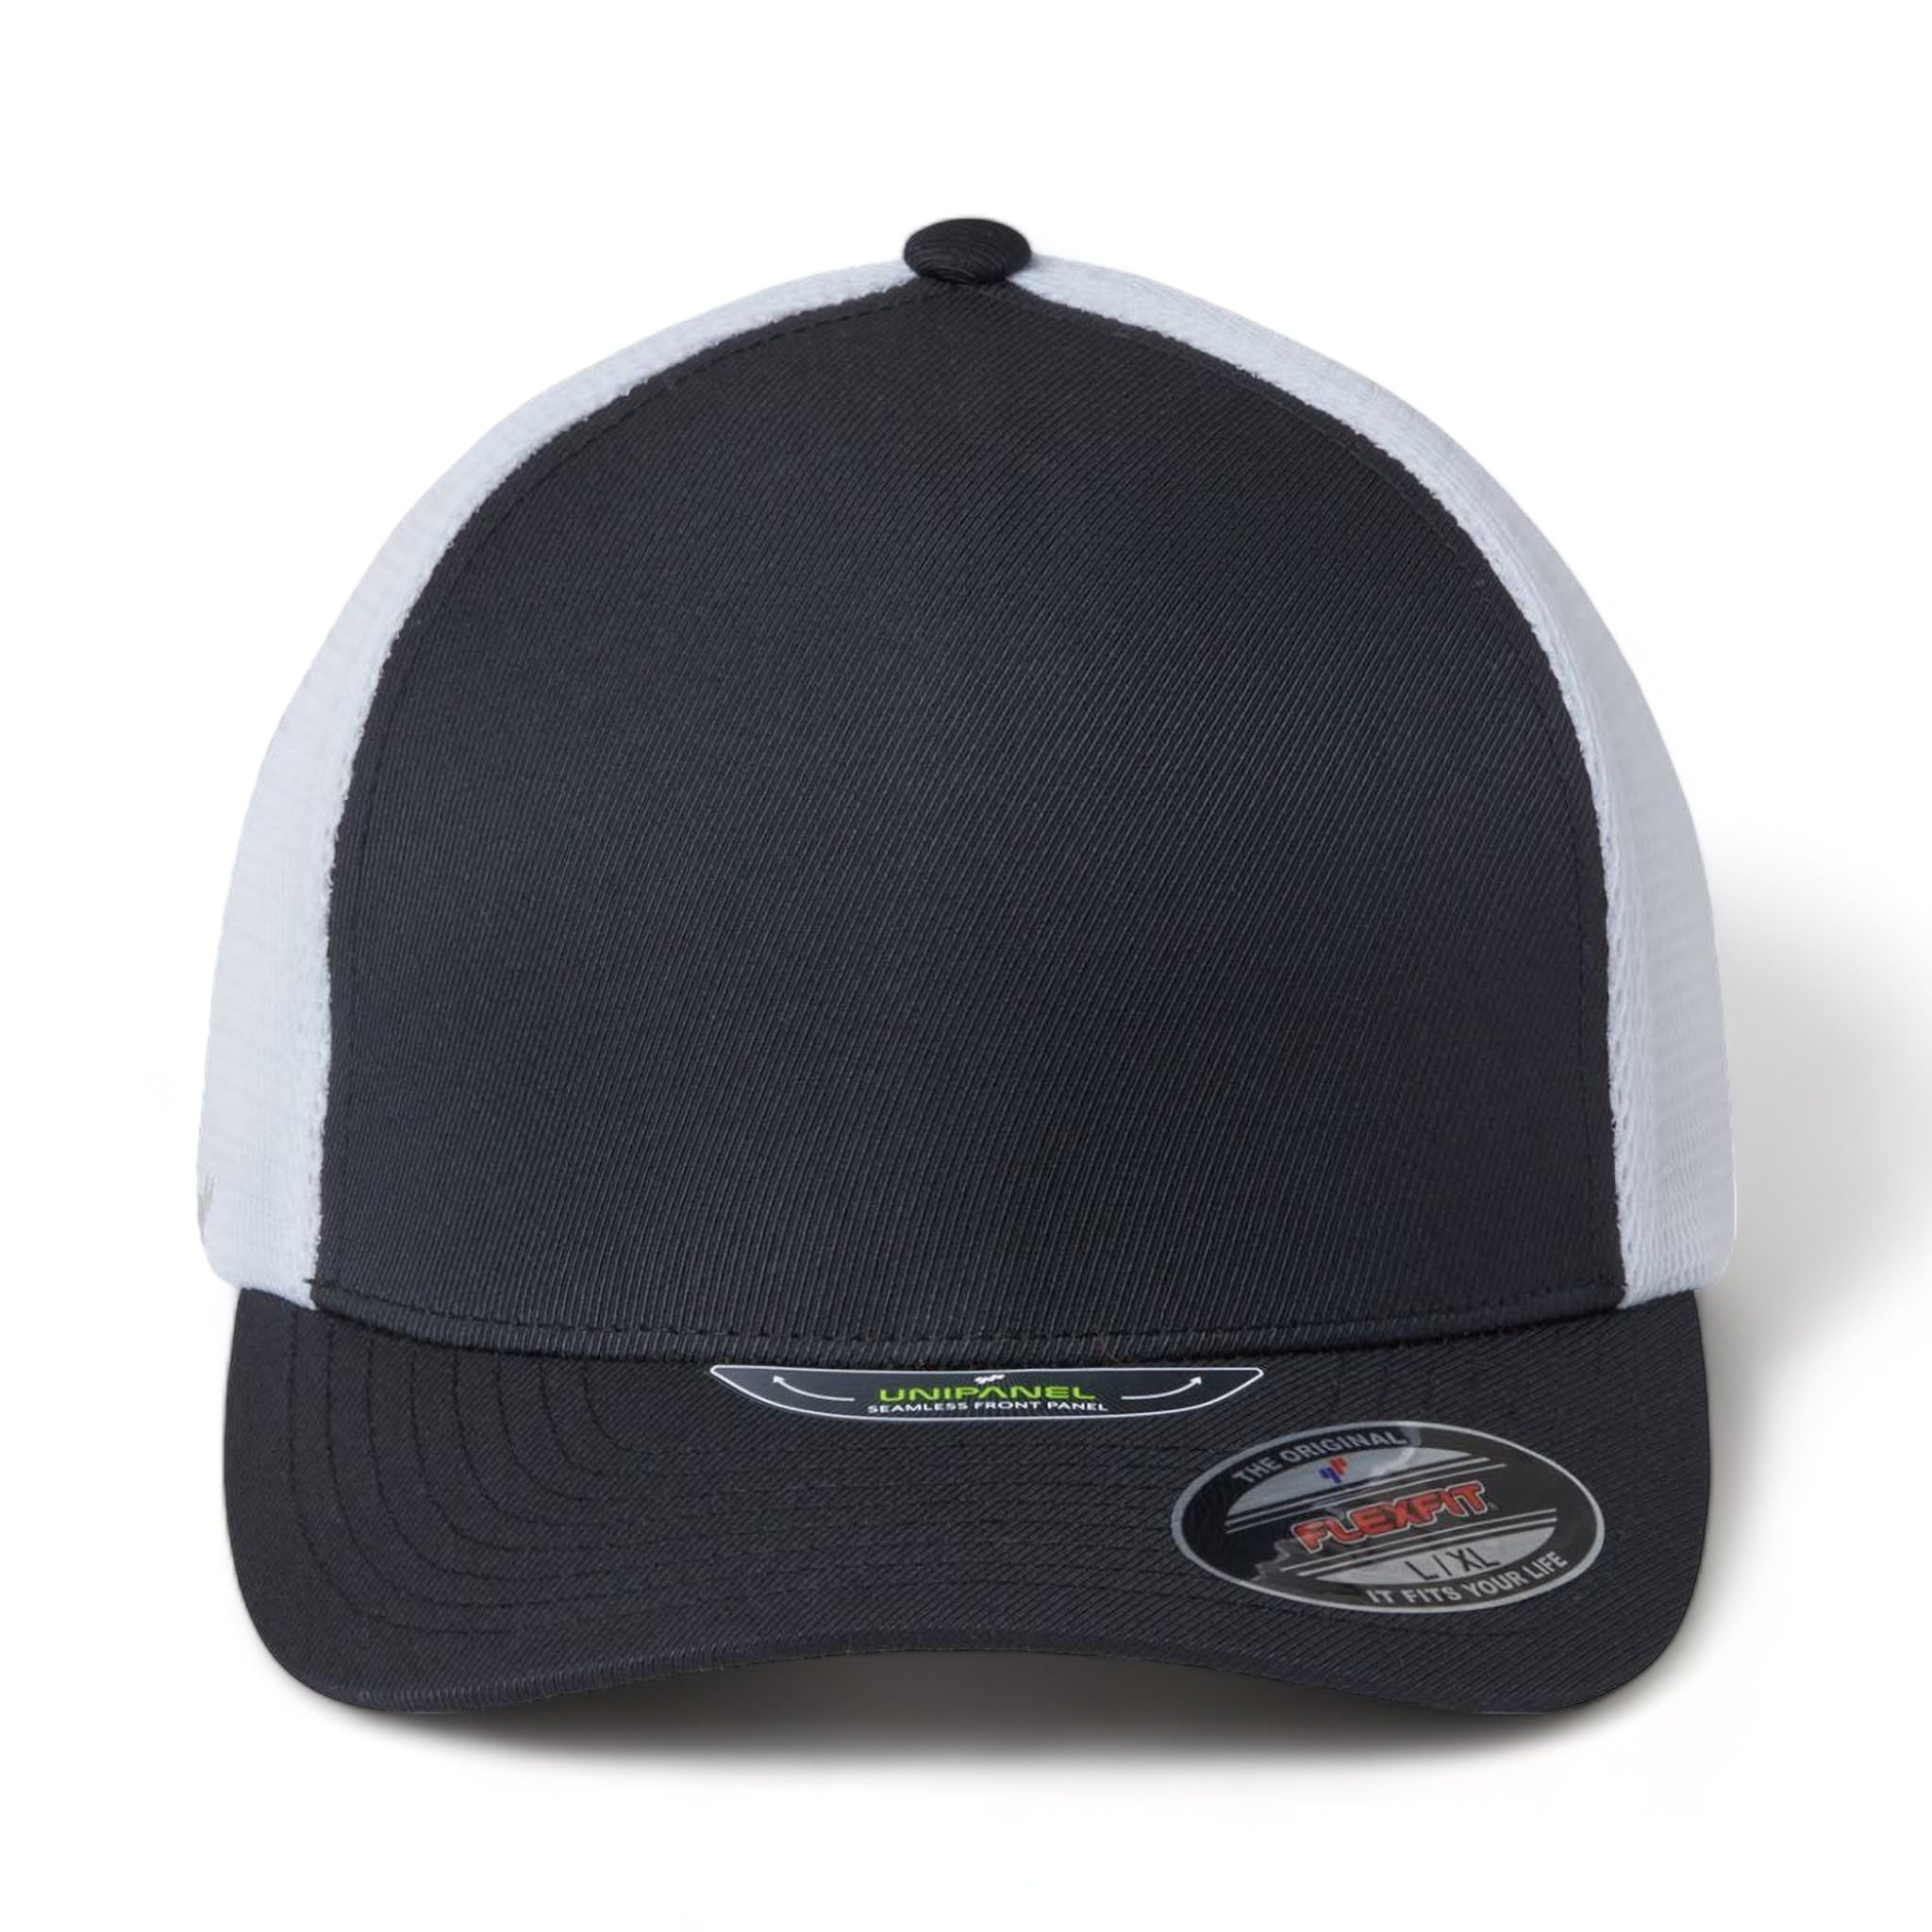 Front view of Flexfit 5511UP custom hat in black and white